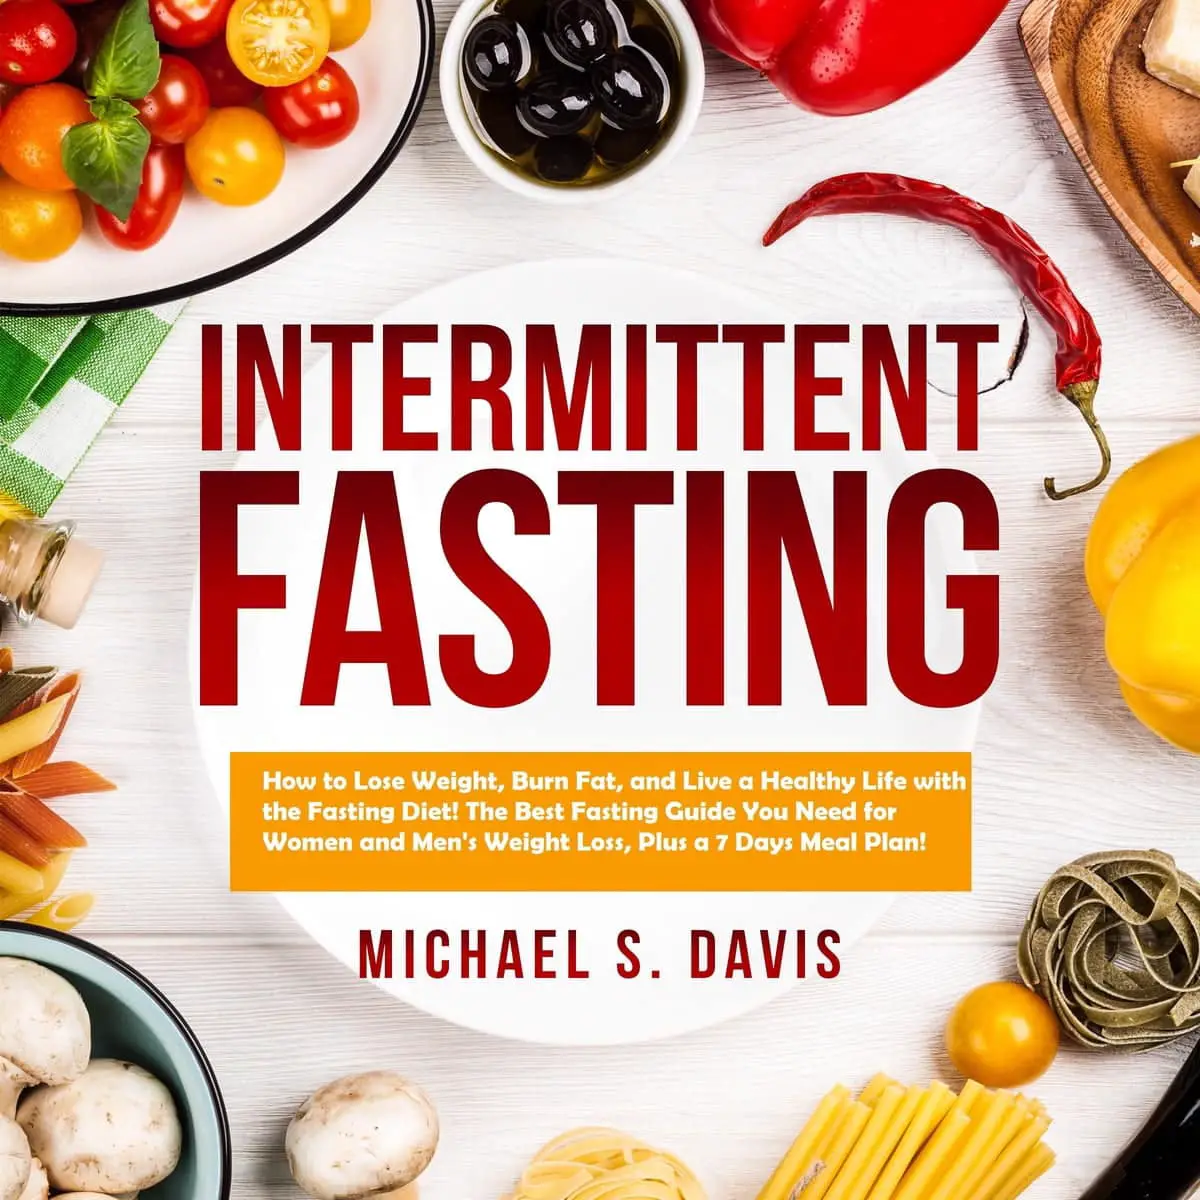 Intermittent Fasting: How to Lose Weight, Burn Fat, and Live a Healthy ...